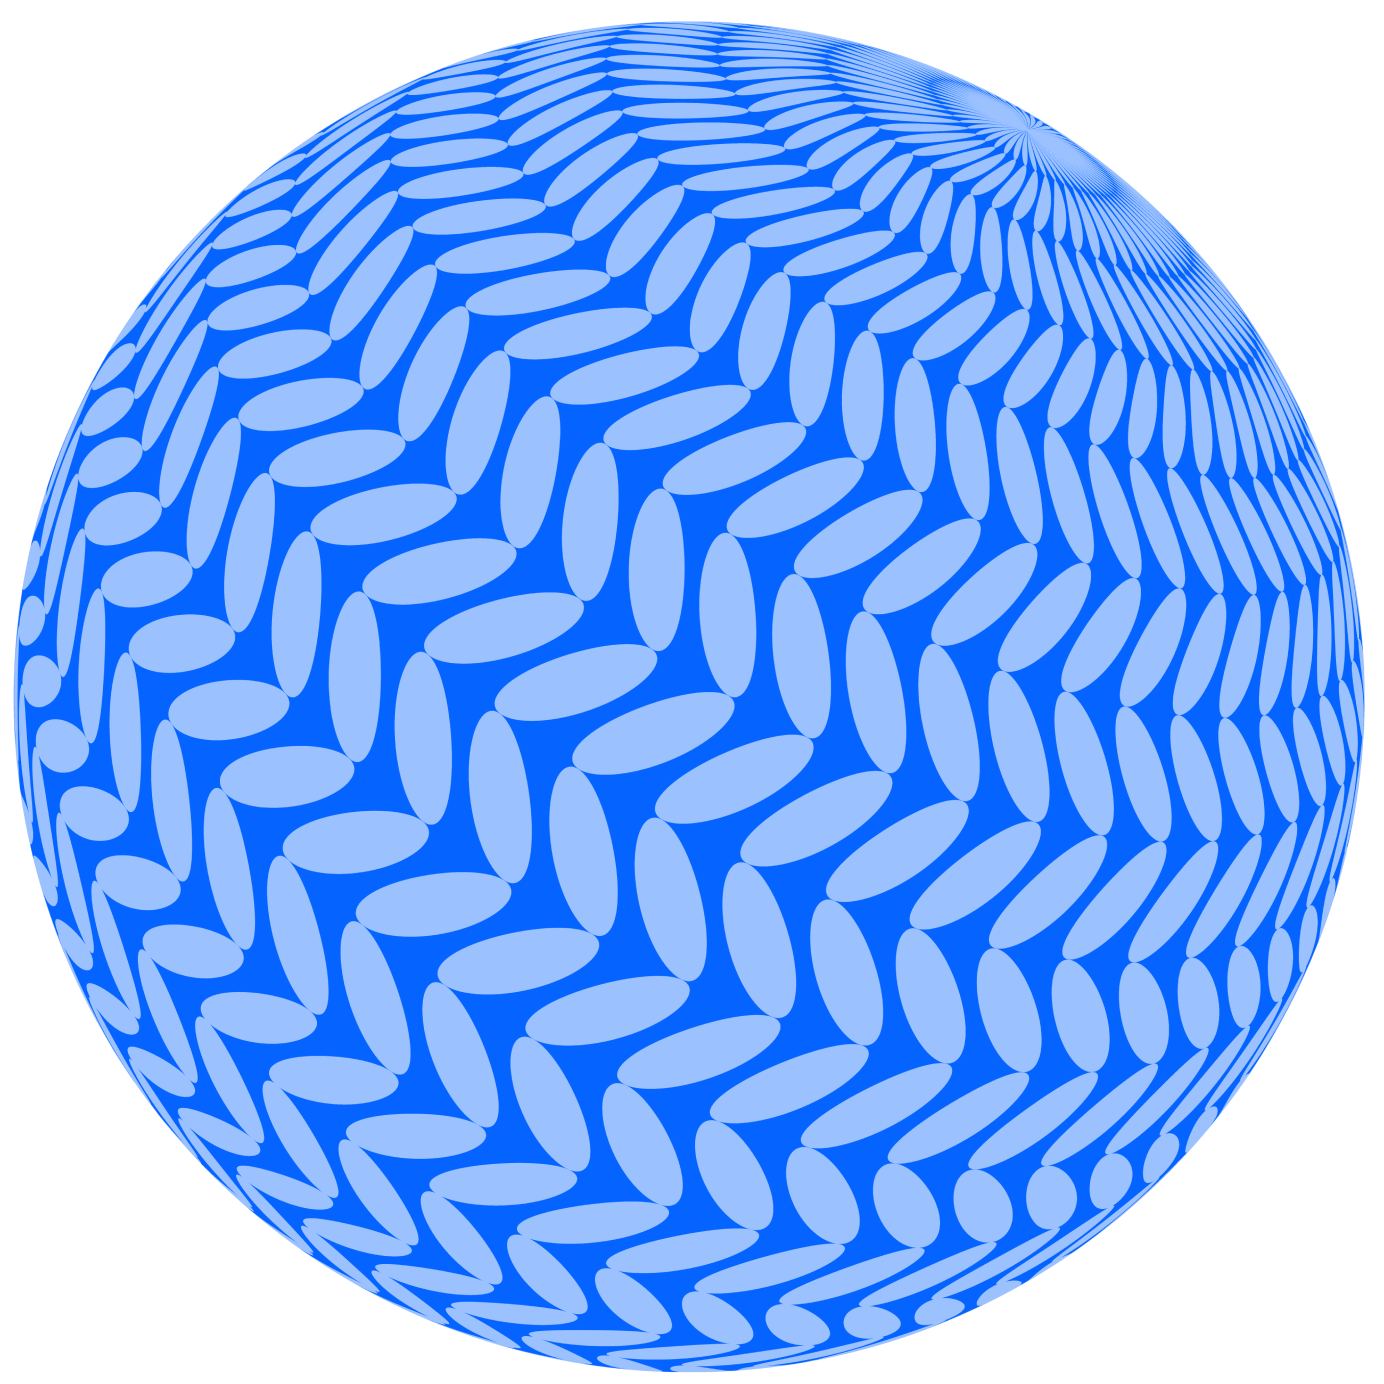 A blue and white sphere with a zig zag pattern.